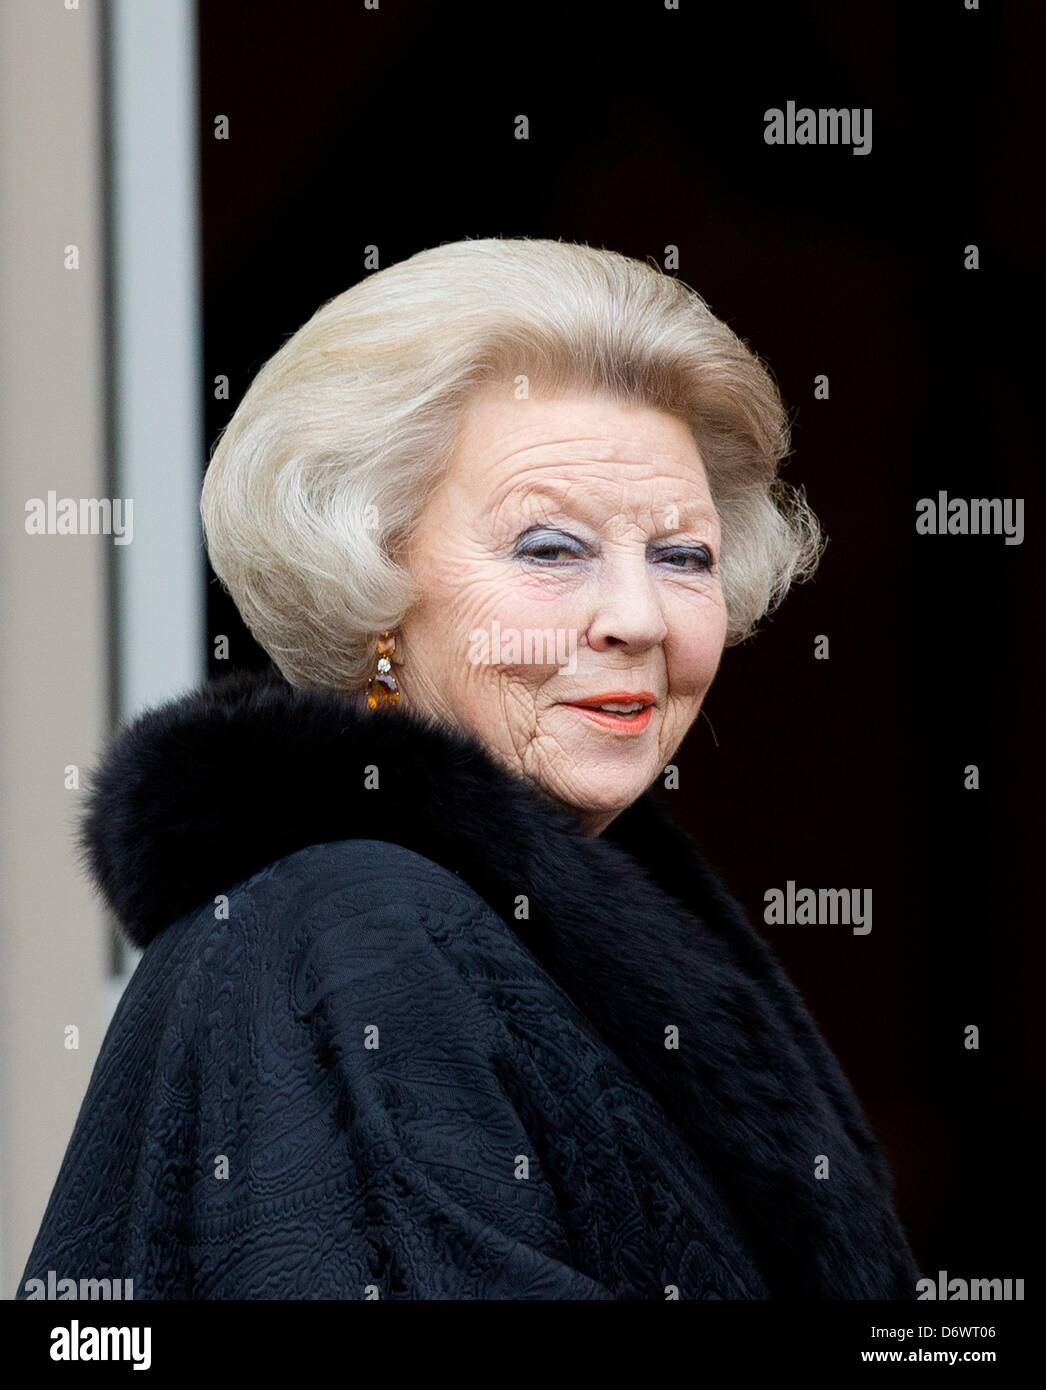 The Hague, The Netherlands. 23rd April, 2013. Queen Beatrix of The Netherlands attends the Koninginnedag concert (Queen's Day concert) at Royal Palace Noordeinde in The Hague, The Netherlands, 23 April 2013. Photo: Patrick van Katwijk/dpa/Alamy Live News Stock Photo